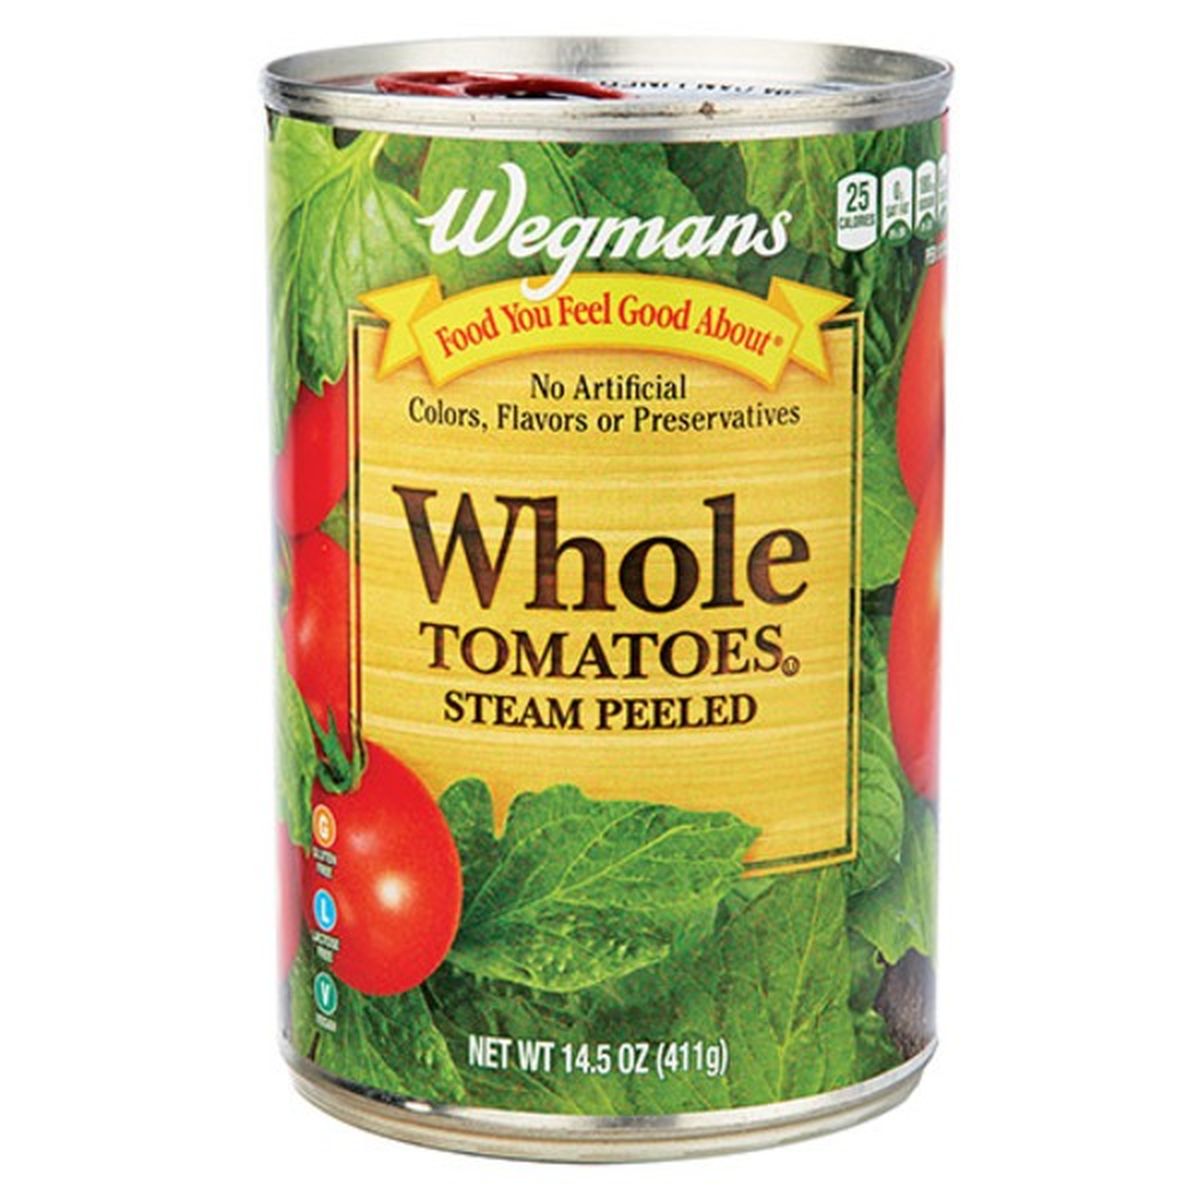 Calories in Wegmans Whole Tomatoes